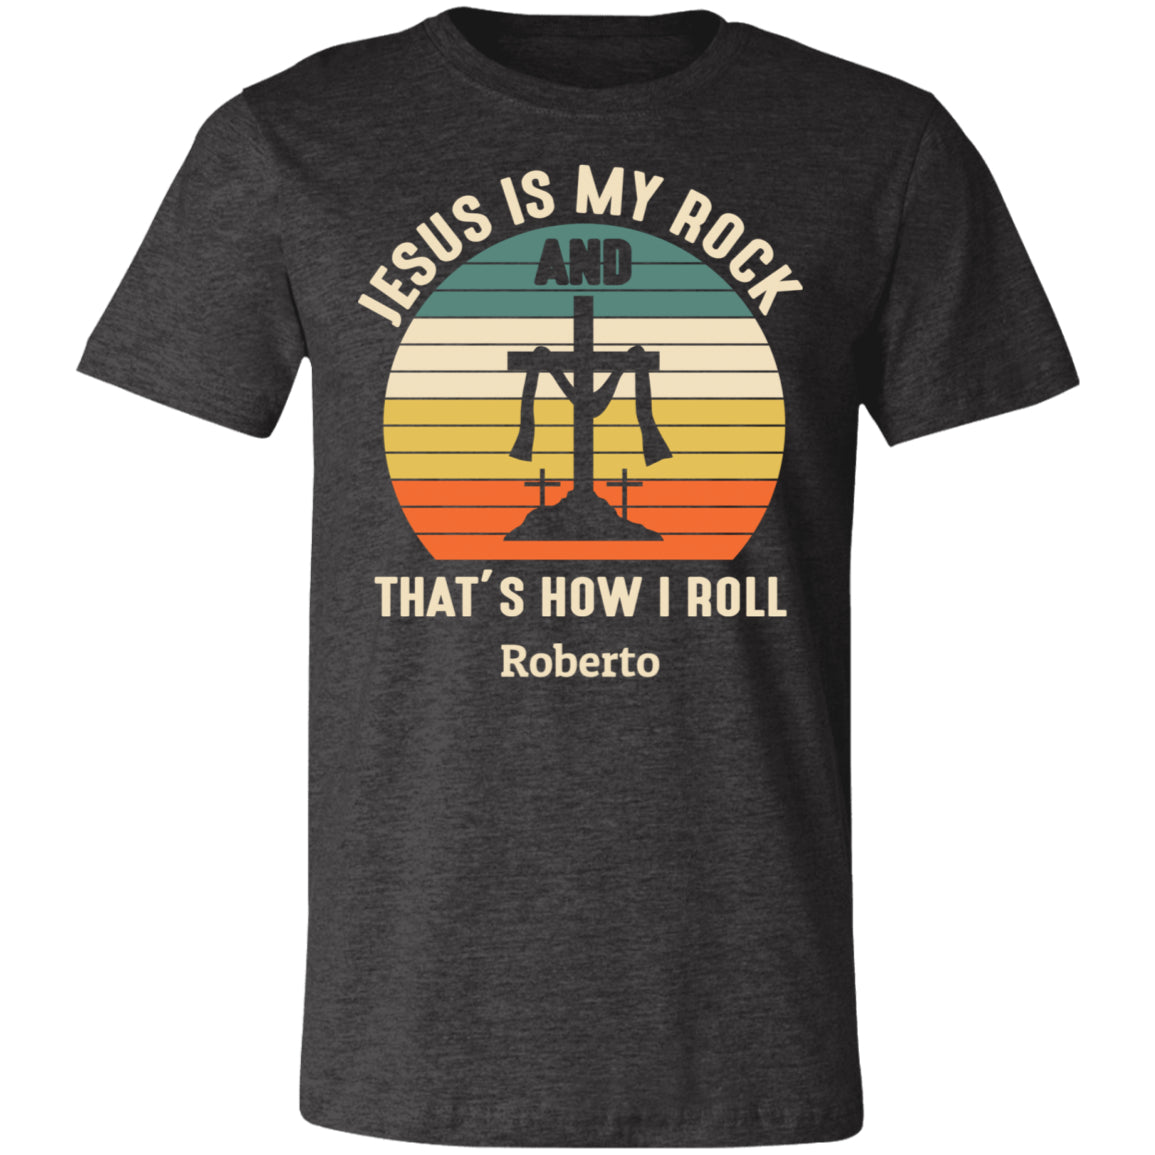 T-Shirts - Personalized Christian Themed T-shirts - Jesus Is My Rock